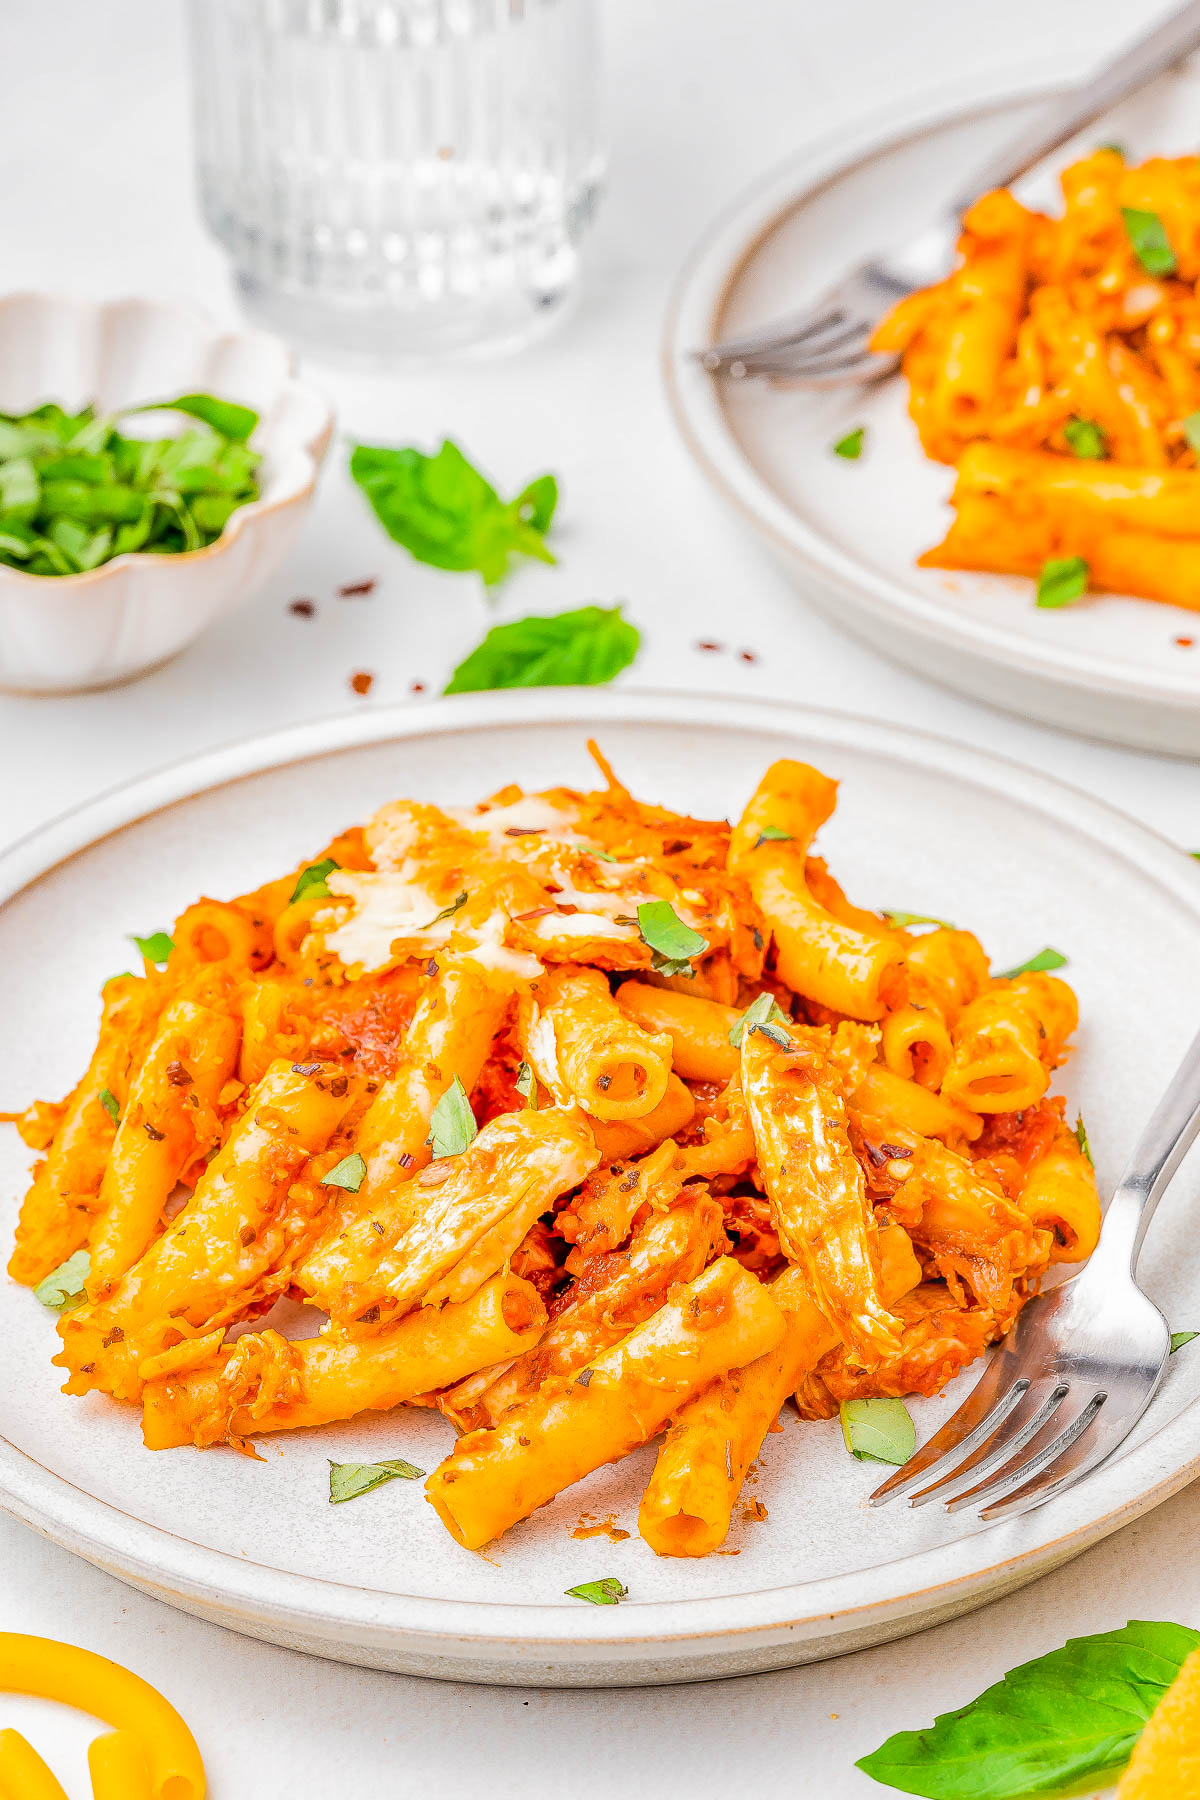 Baked Ziti with Chicken — A FAST and EASY pasta bake made with al dente ziti, juicy chicken, marinara sauce, and two types of CHEESE for the ultimate comfort food casserole! Ready in 45 minutes, perfect for weeknight dinners or casual family get-togethers, and picky eater approved! Use pasta that's in your pantry, a jar of marinara, rotisserie chicken, cheese, and you're set - nothing too fancy or complicated here and planned leftovers are a bonus!